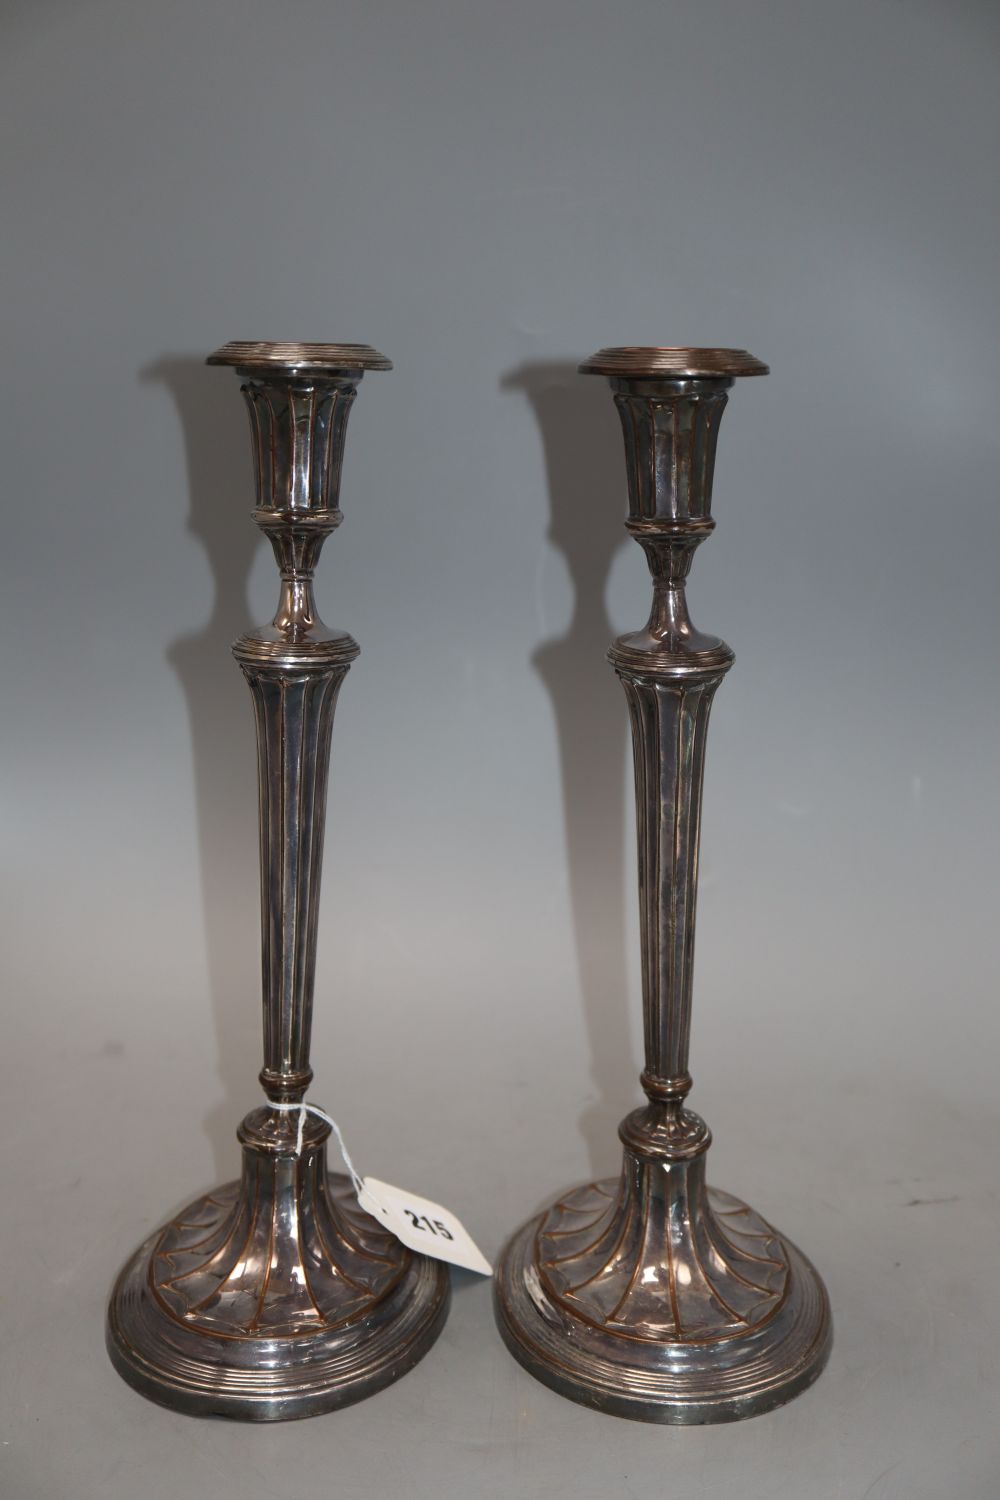 A pair of late 19th / early 20th century Old Sheffield plate candlesticks, height 31cm